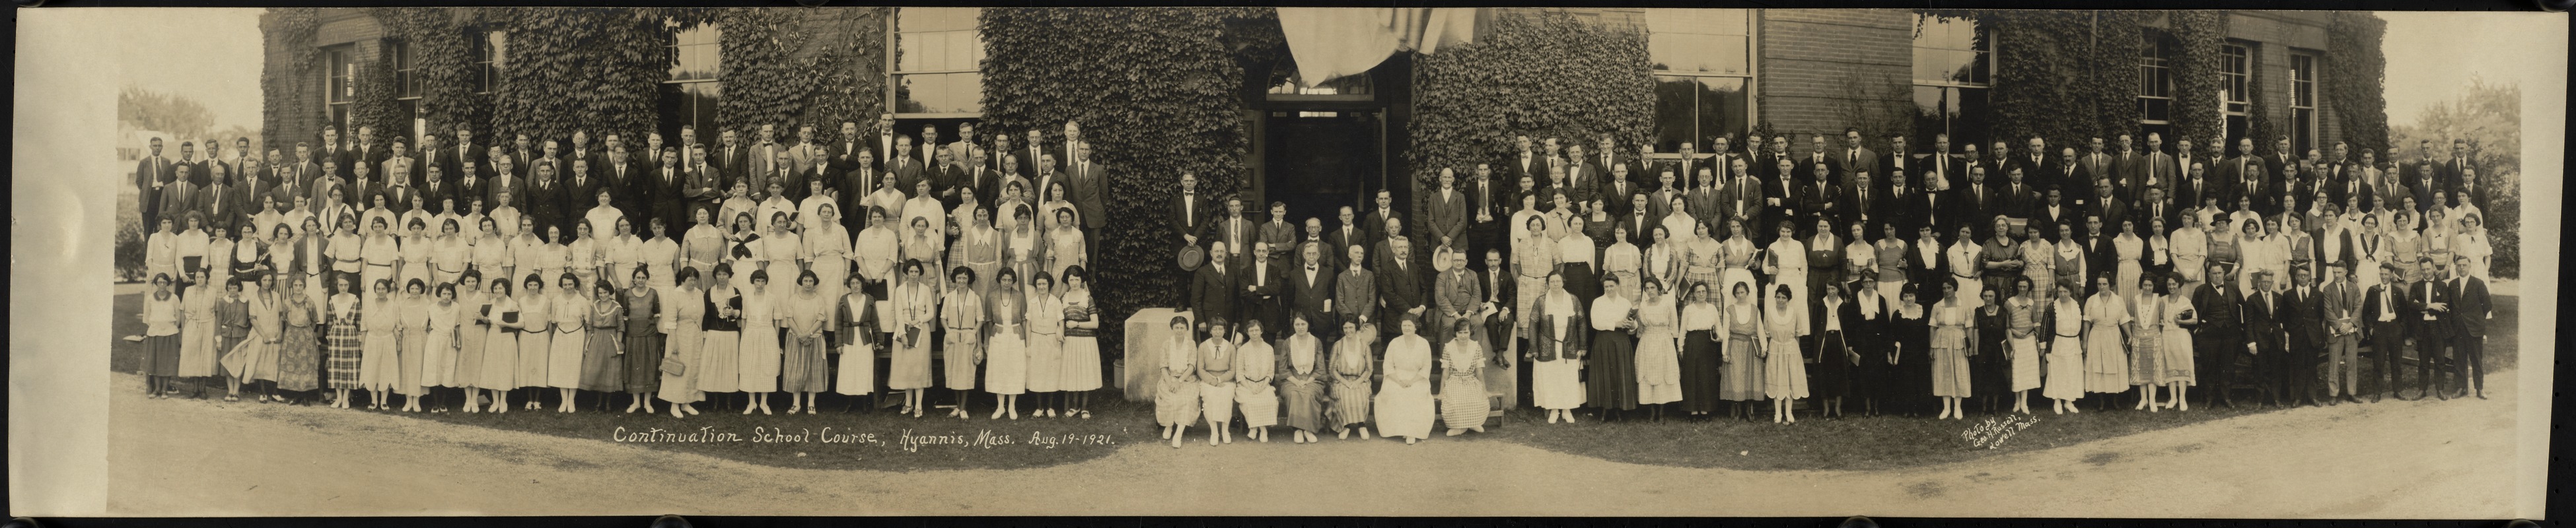 Hyannis Continuation School, Class of 1921, Hyannis, MA